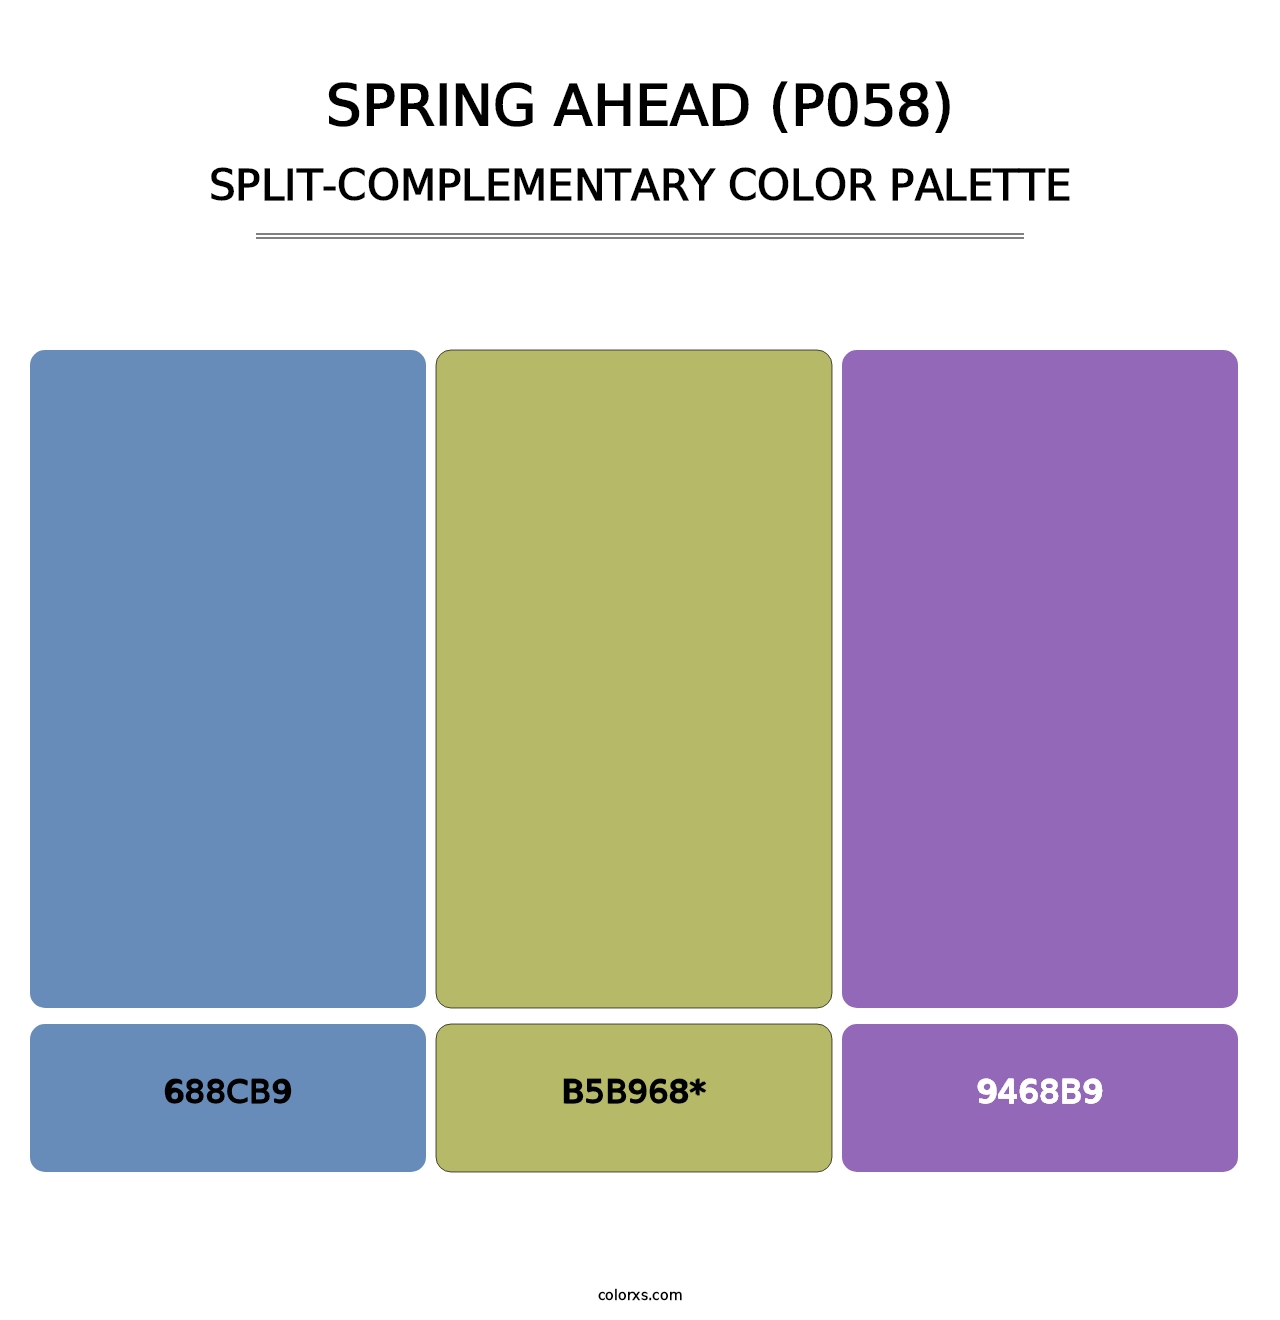 Spring Ahead (P058) - Split-Complementary Color Palette